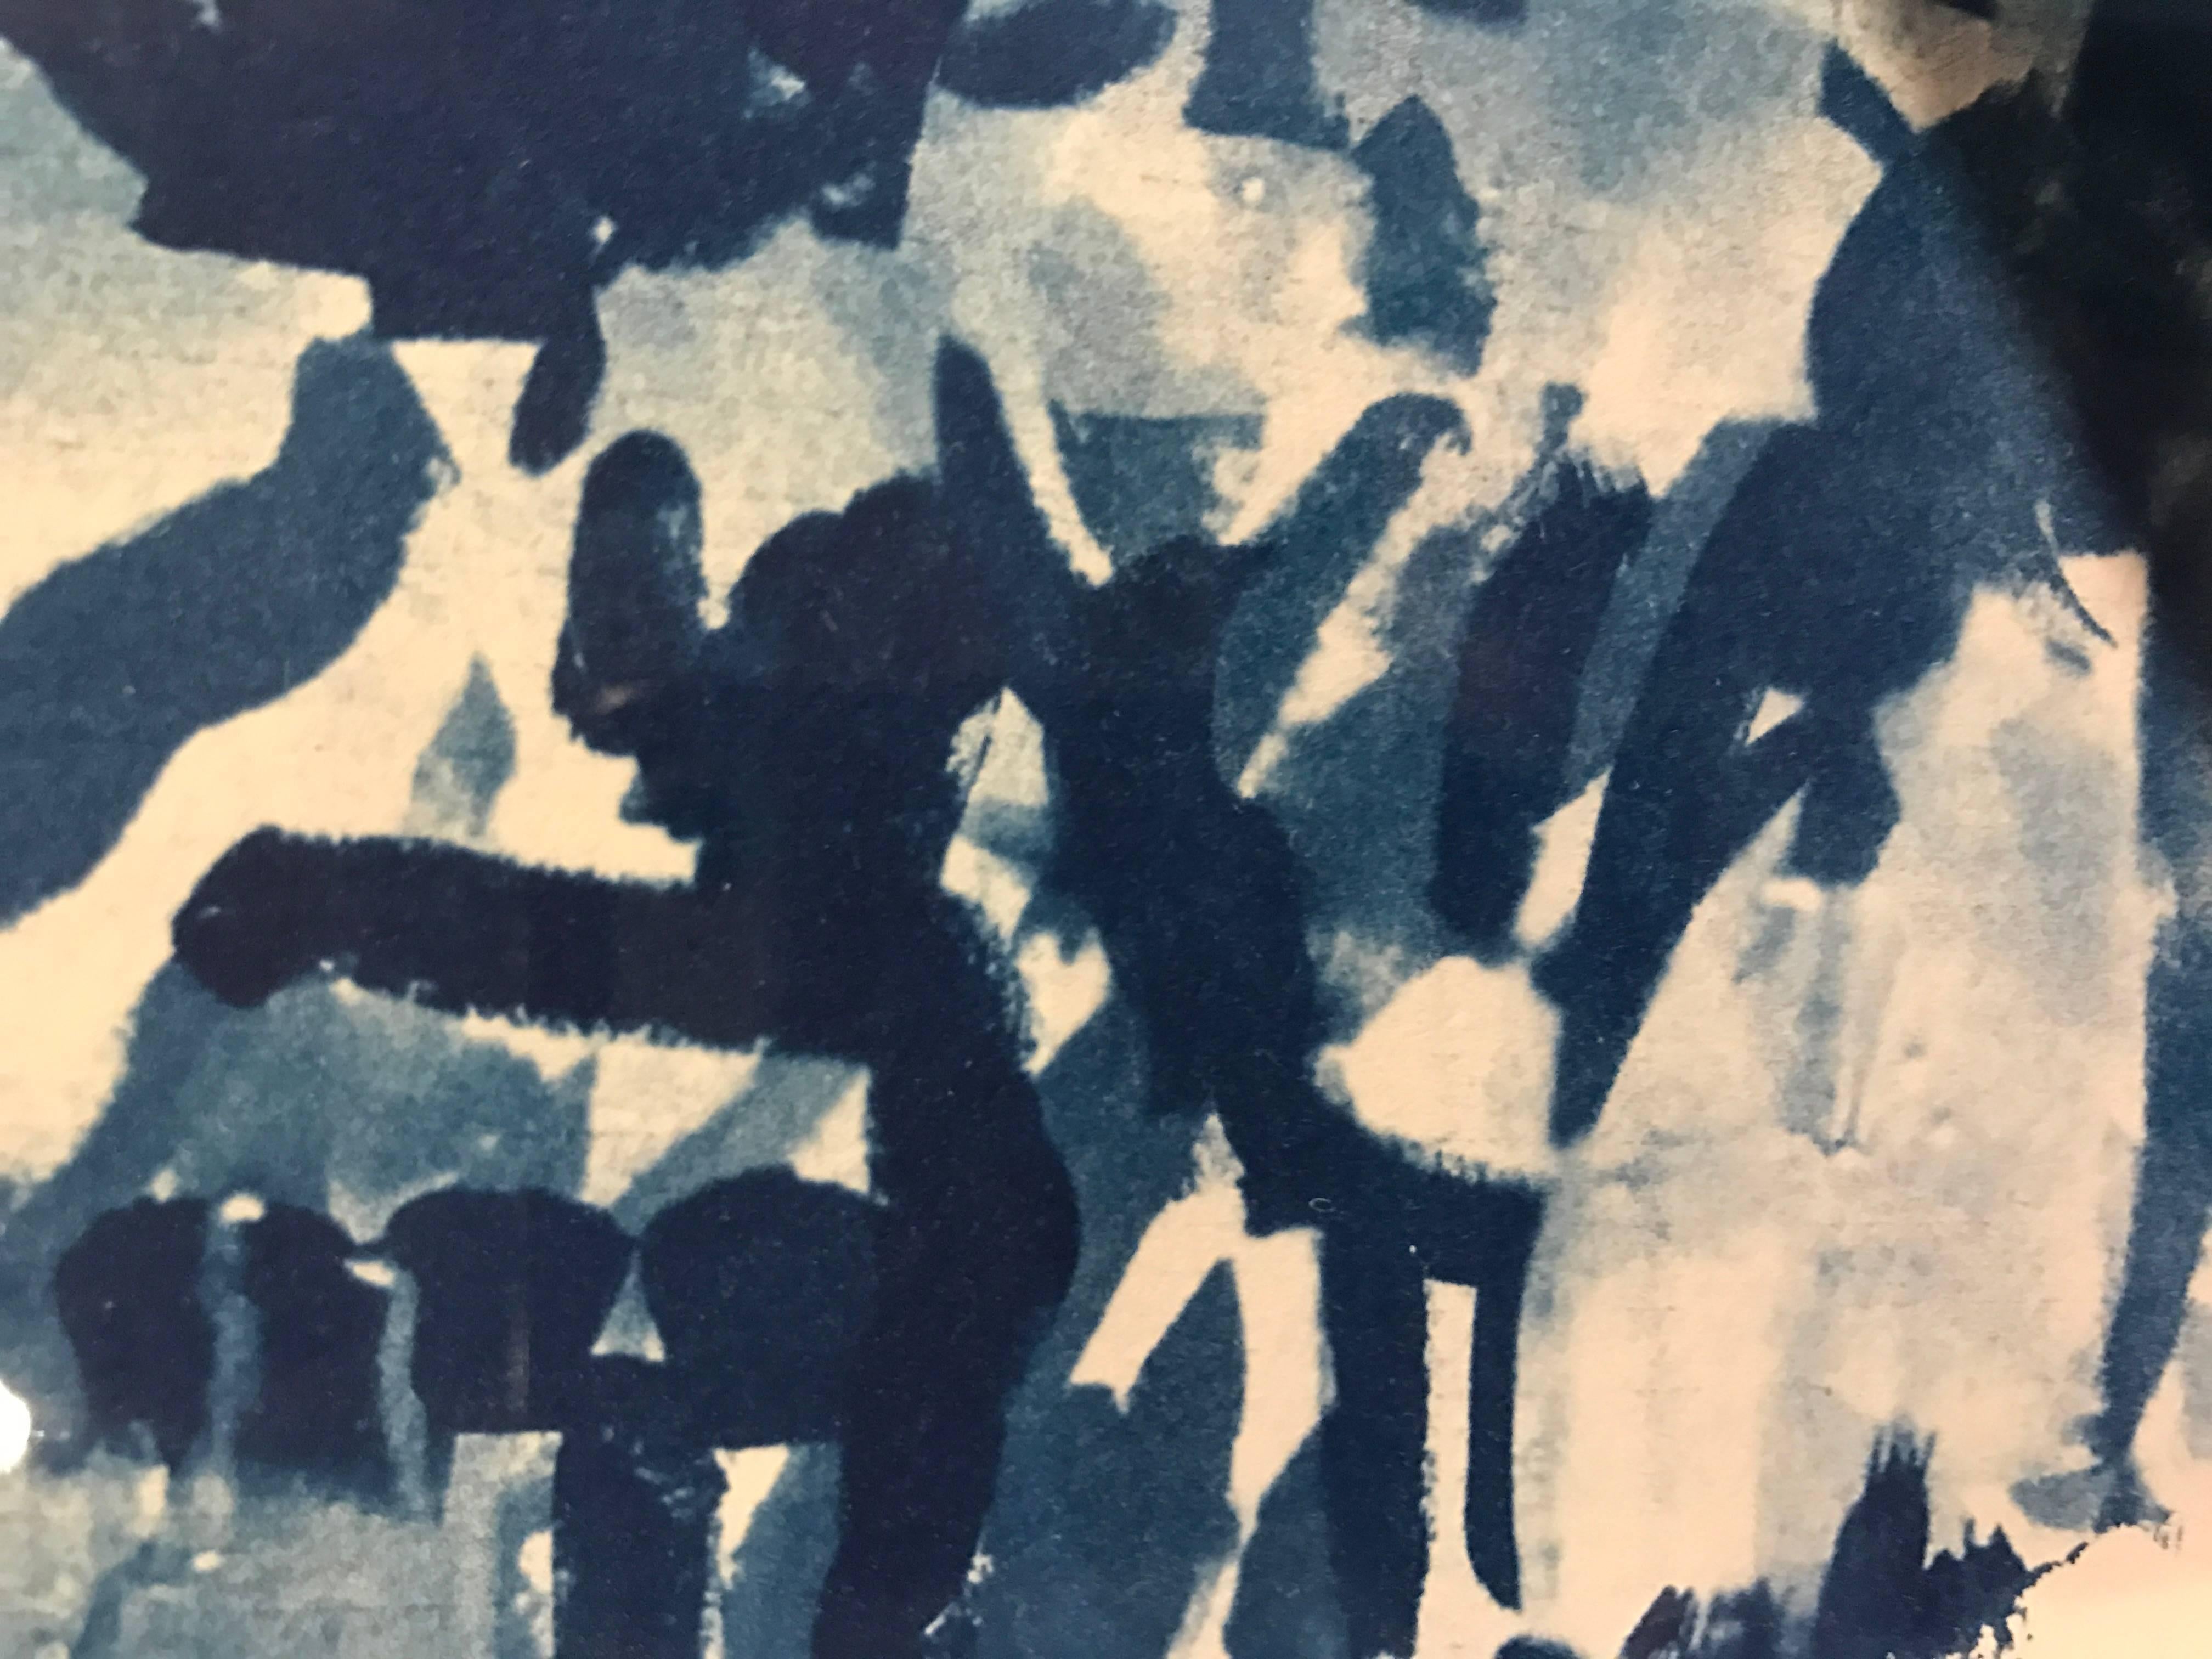 Contemporary American artist Sandra Constantine recreates the effect of an old architects blue print using the print type Cyanotype developed by an English scientist, John Frederick William Herschel in 1842.
Cyanotype is made by coating paper with